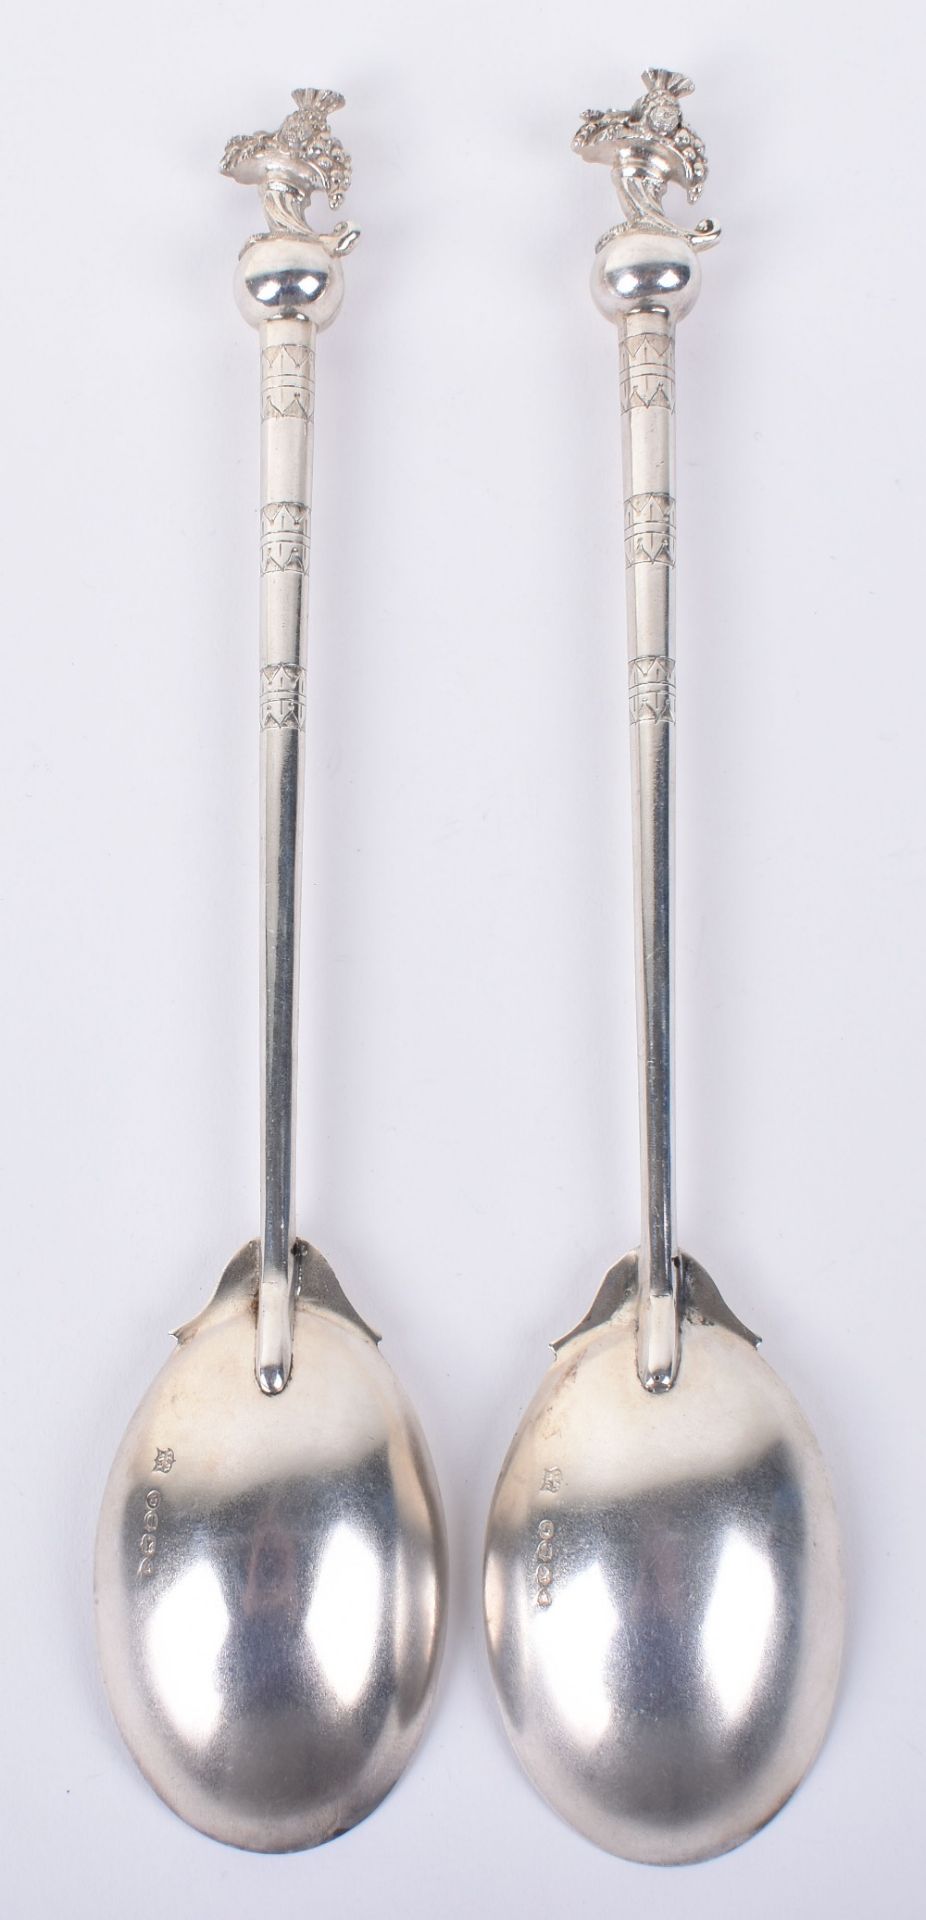 A fine and rare pair of Victorian silver salad spoons, by Wilson & Davis, London 1879 - Image 2 of 7